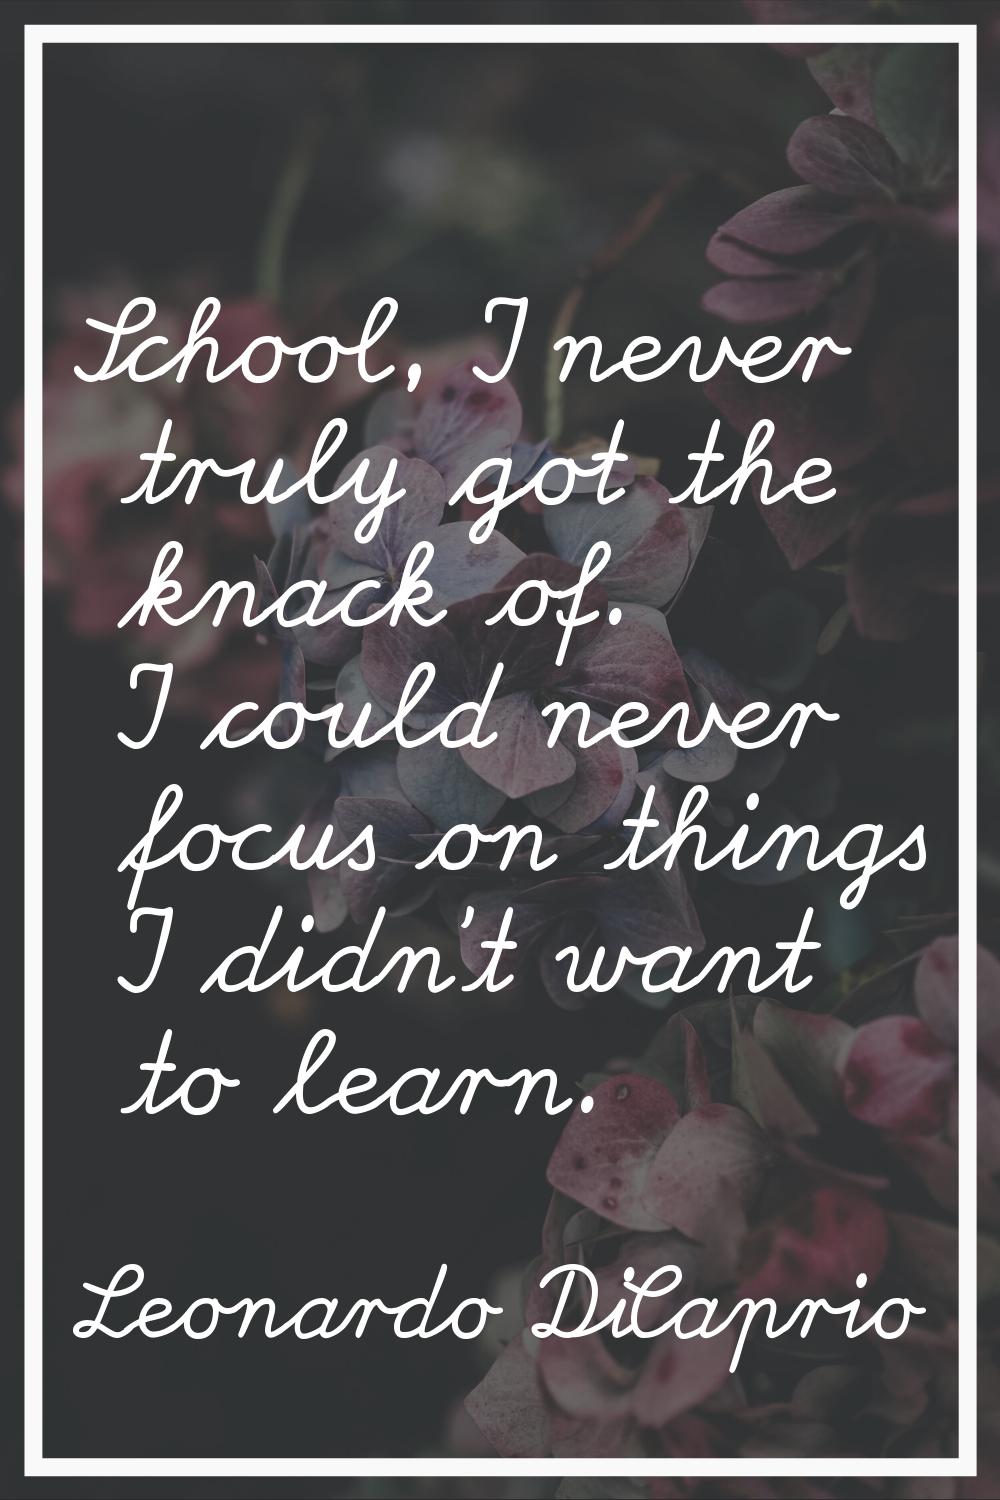 School, I never truly got the knack of. I could never focus on things I didn't want to learn.